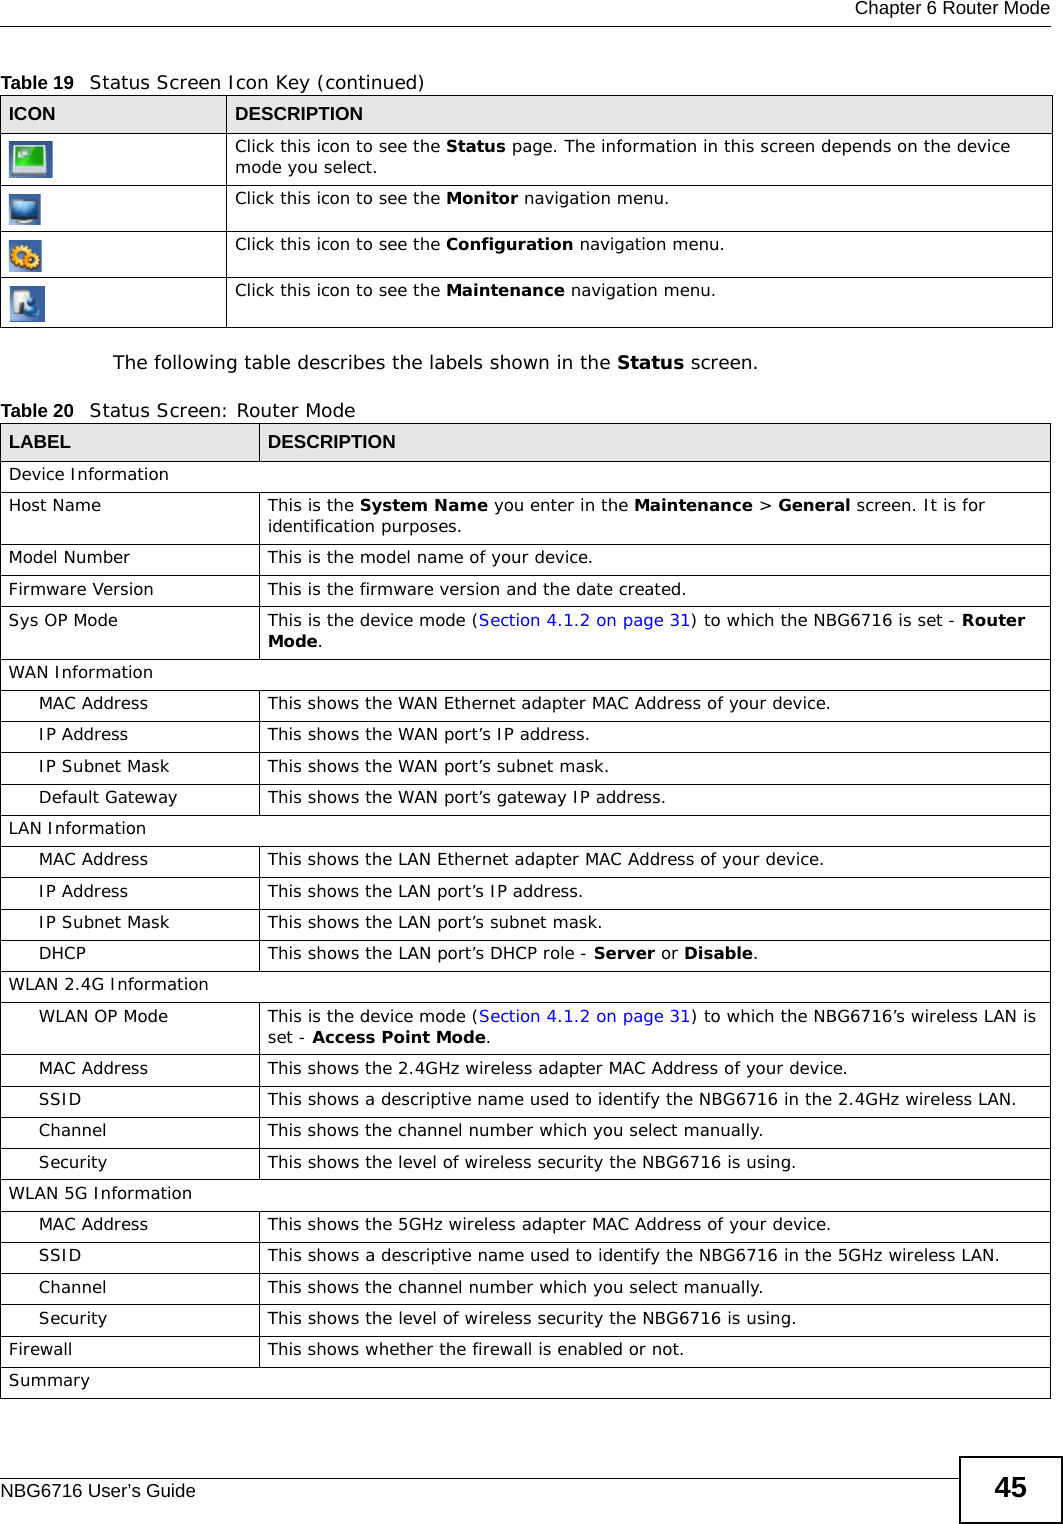  Chapter 6 Router ModeNBG6716 User’s Guide 45The following table describes the labels shown in the Status screen.Click this icon to see the Status page. The information in this screen depends on the device mode you select. Click this icon to see the Monitor navigation menu. Click this icon to see the Configuration navigation menu. Click this icon to see the Maintenance navigation menu. Table 19   Status Screen Icon Key (continued)ICON DESCRIPTIONTable 20   Status Screen: Router Mode  LABEL DESCRIPTIONDevice InformationHost Name This is the System Name you enter in the Maintenance &gt; General screen. It is for identification purposes.Model Number This is the model name of your device.Firmware Version This is the firmware version and the date created. Sys OP Mode This is the device mode (Section 4.1.2 on page 31) to which the NBG6716 is set - Router Mode.WAN InformationMAC Address This shows the WAN Ethernet adapter MAC Address of your device.IP Address This shows the WAN port’s IP address.IP Subnet Mask This shows the WAN port’s subnet mask.Default Gateway This shows the WAN port’s gateway IP address.LAN InformationMAC Address This shows the LAN Ethernet adapter MAC Address of your device.IP Address This shows the LAN port’s IP address.IP Subnet Mask This shows the LAN port’s subnet mask.DHCP This shows the LAN port’s DHCP role - Server or Disable.WLAN 2.4G InformationWLAN OP Mode This is the device mode (Section 4.1.2 on page 31) to which the NBG6716’s wireless LAN is set - Access Point Mode.MAC Address This shows the 2.4GHz wireless adapter MAC Address of your device.SSID This shows a descriptive name used to identify the NBG6716 in the 2.4GHz wireless LAN. Channel This shows the channel number which you select manually.Security This shows the level of wireless security the NBG6716 is using.WLAN 5G InformationMAC Address This shows the 5GHz wireless adapter MAC Address of your device.SSID This shows a descriptive name used to identify the NBG6716 in the 5GHz wireless LAN. Channel This shows the channel number which you select manually.Security This shows the level of wireless security the NBG6716 is using.Firewall This shows whether the firewall is enabled or not.Summary